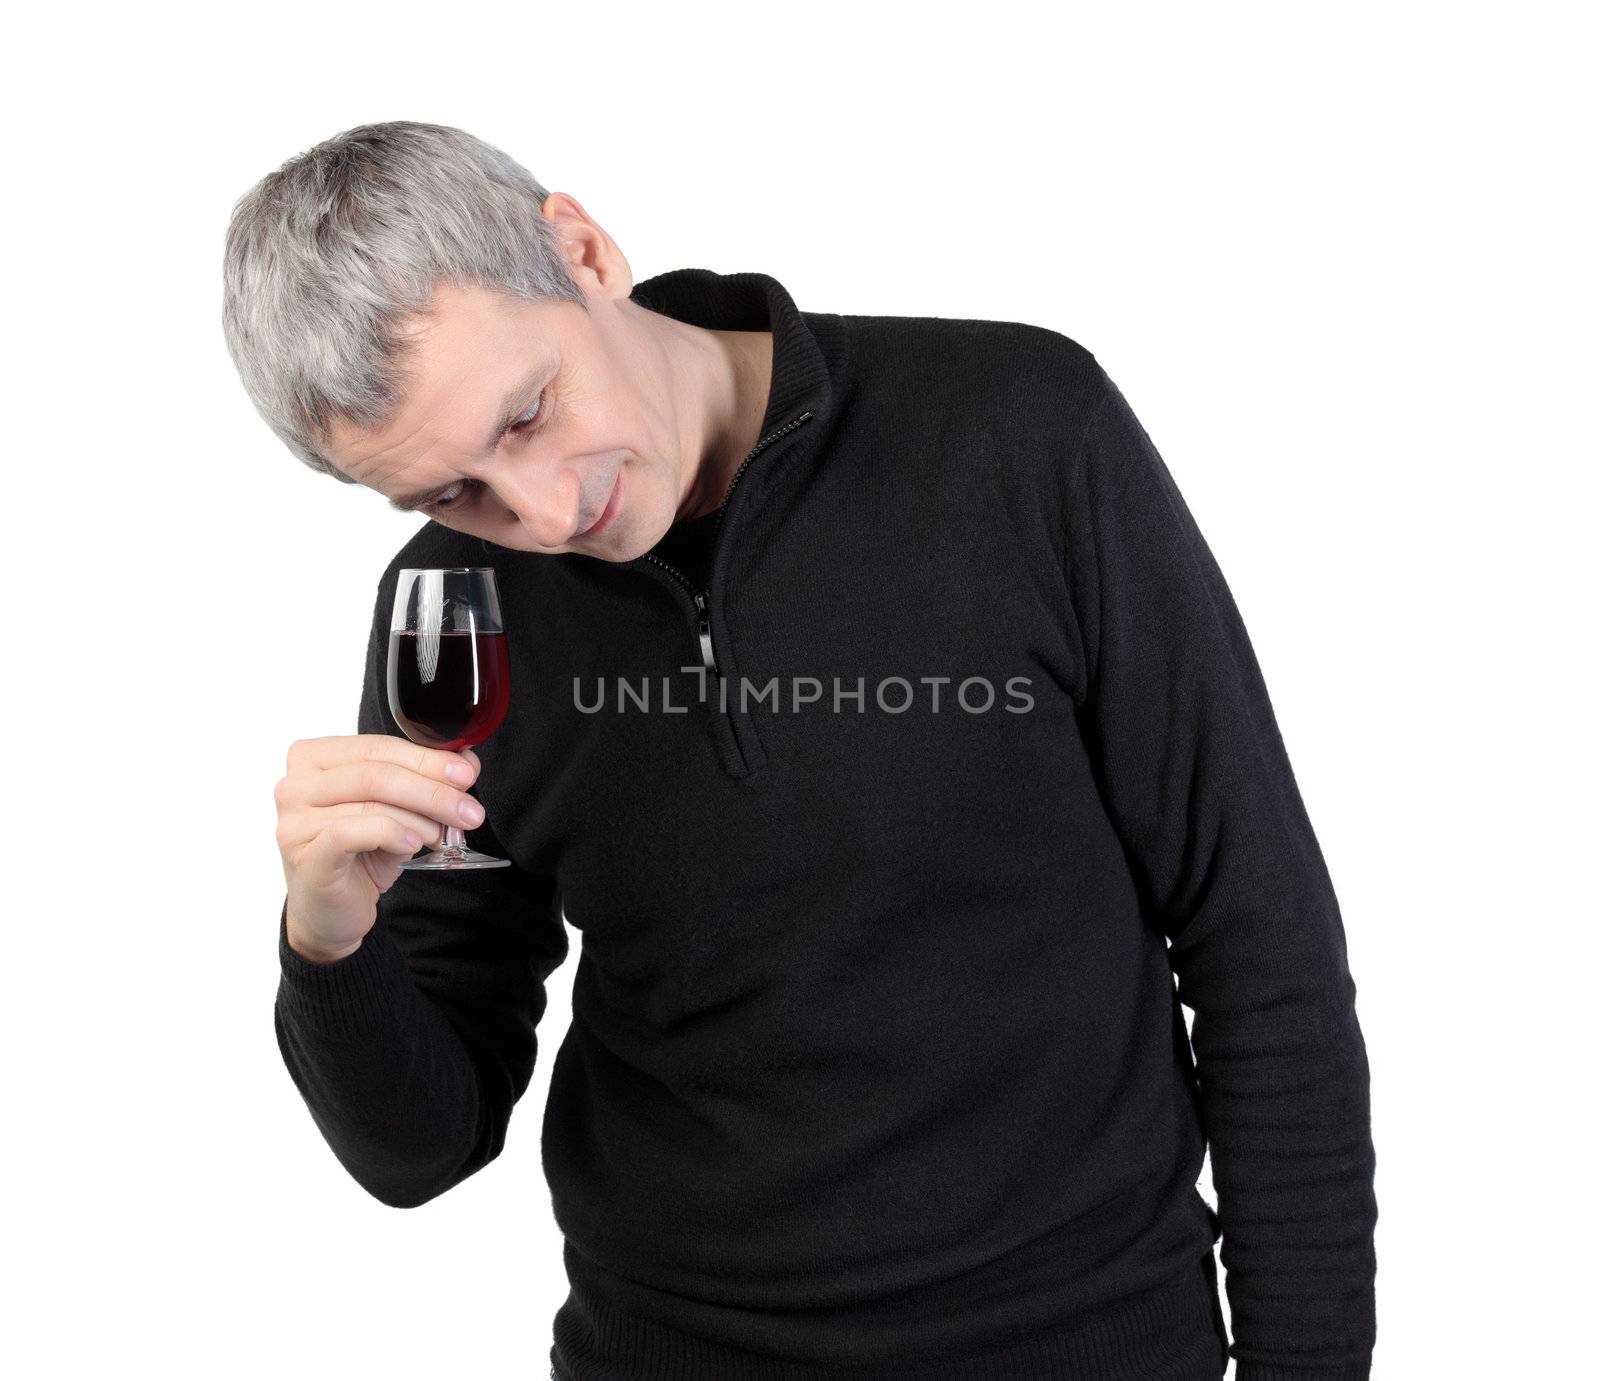 Man looks at a glass of red port wine, on white background